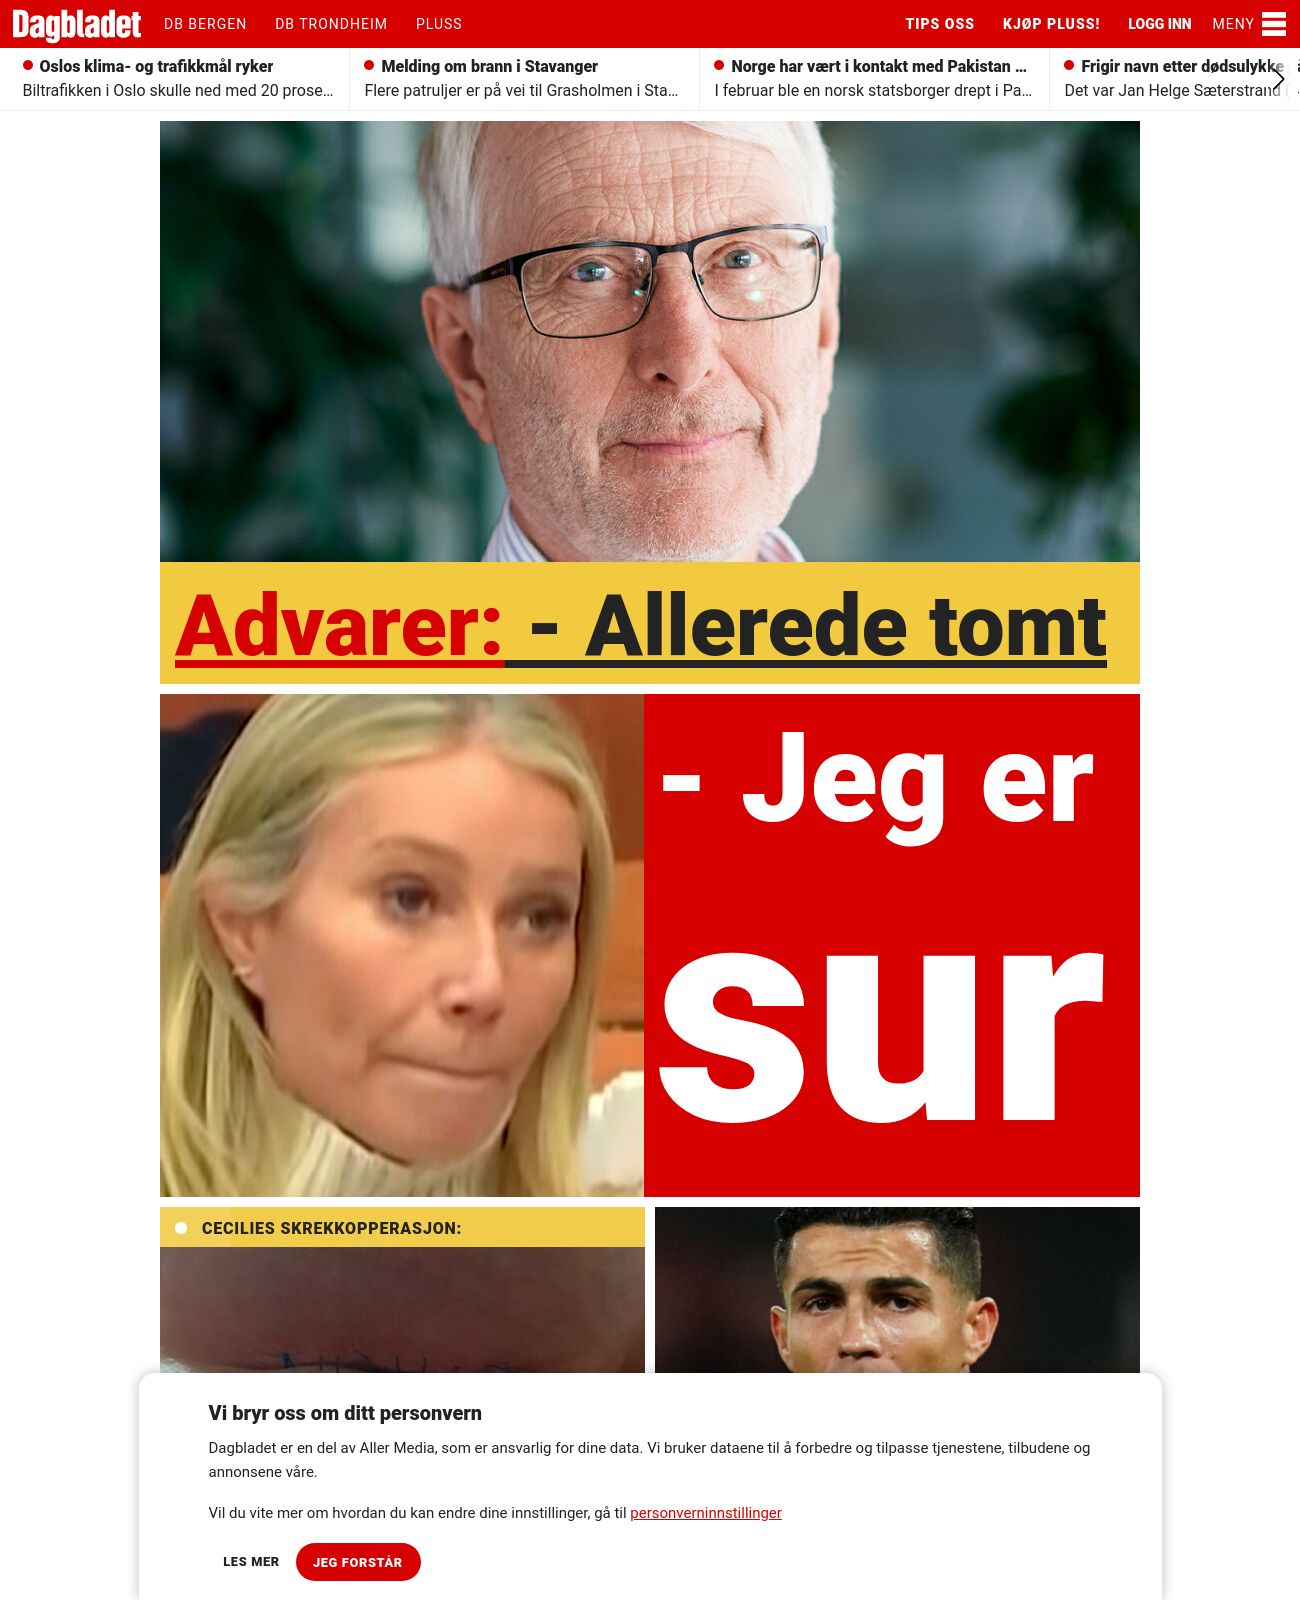 Dagbladet at 2023-03-23 02:46:27+01:00 local time